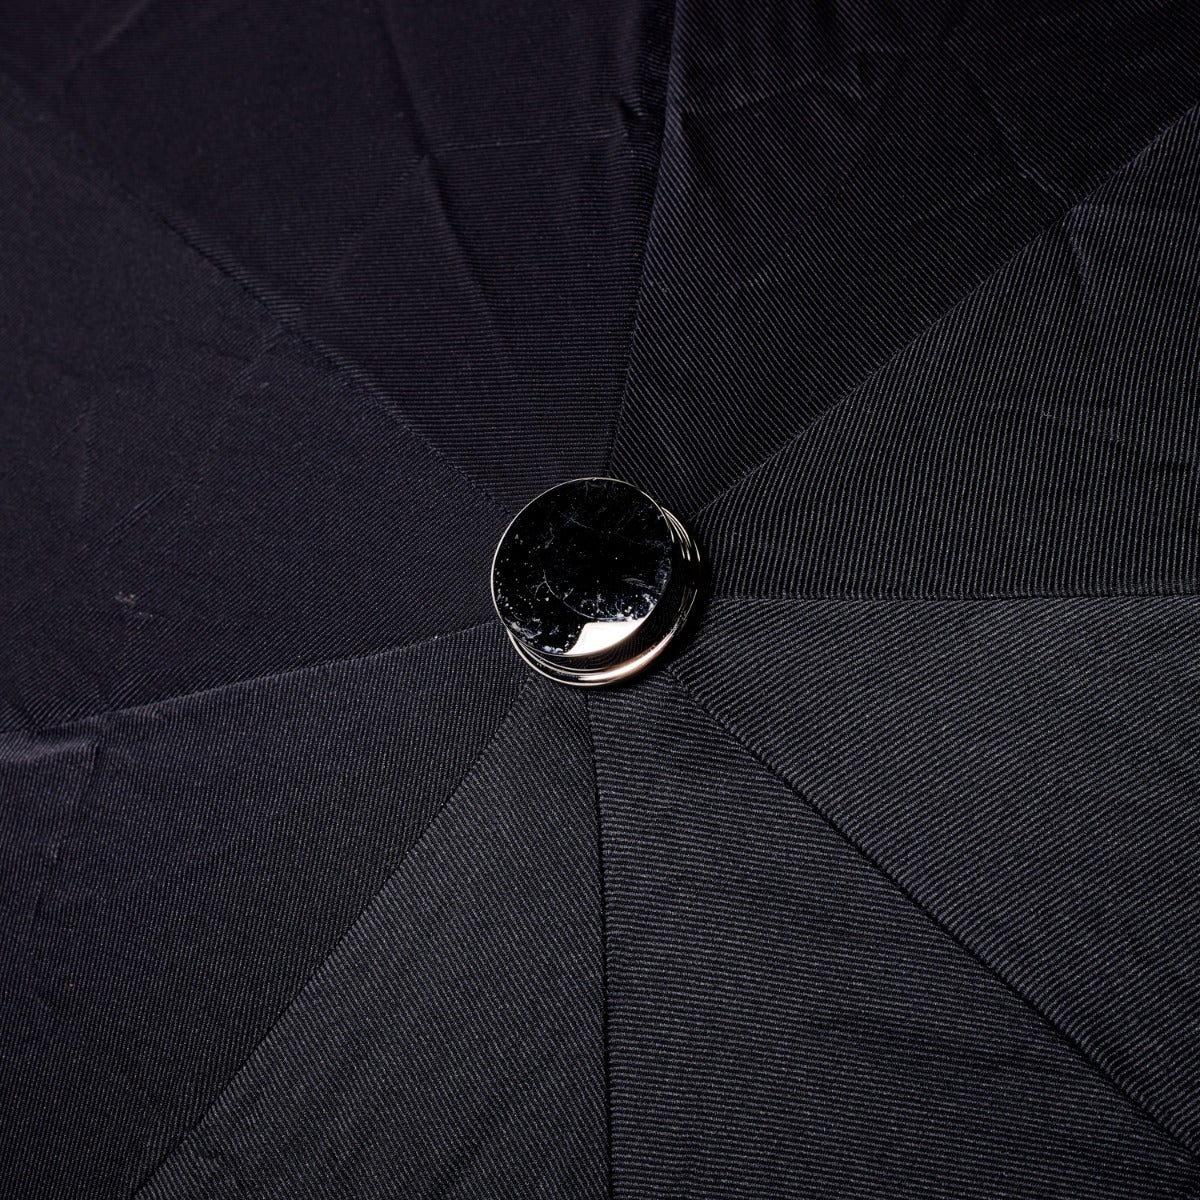 A Black Alligator Travel Umbrella with Black Canopy from KirbyAllison.com in close up with a button on it.